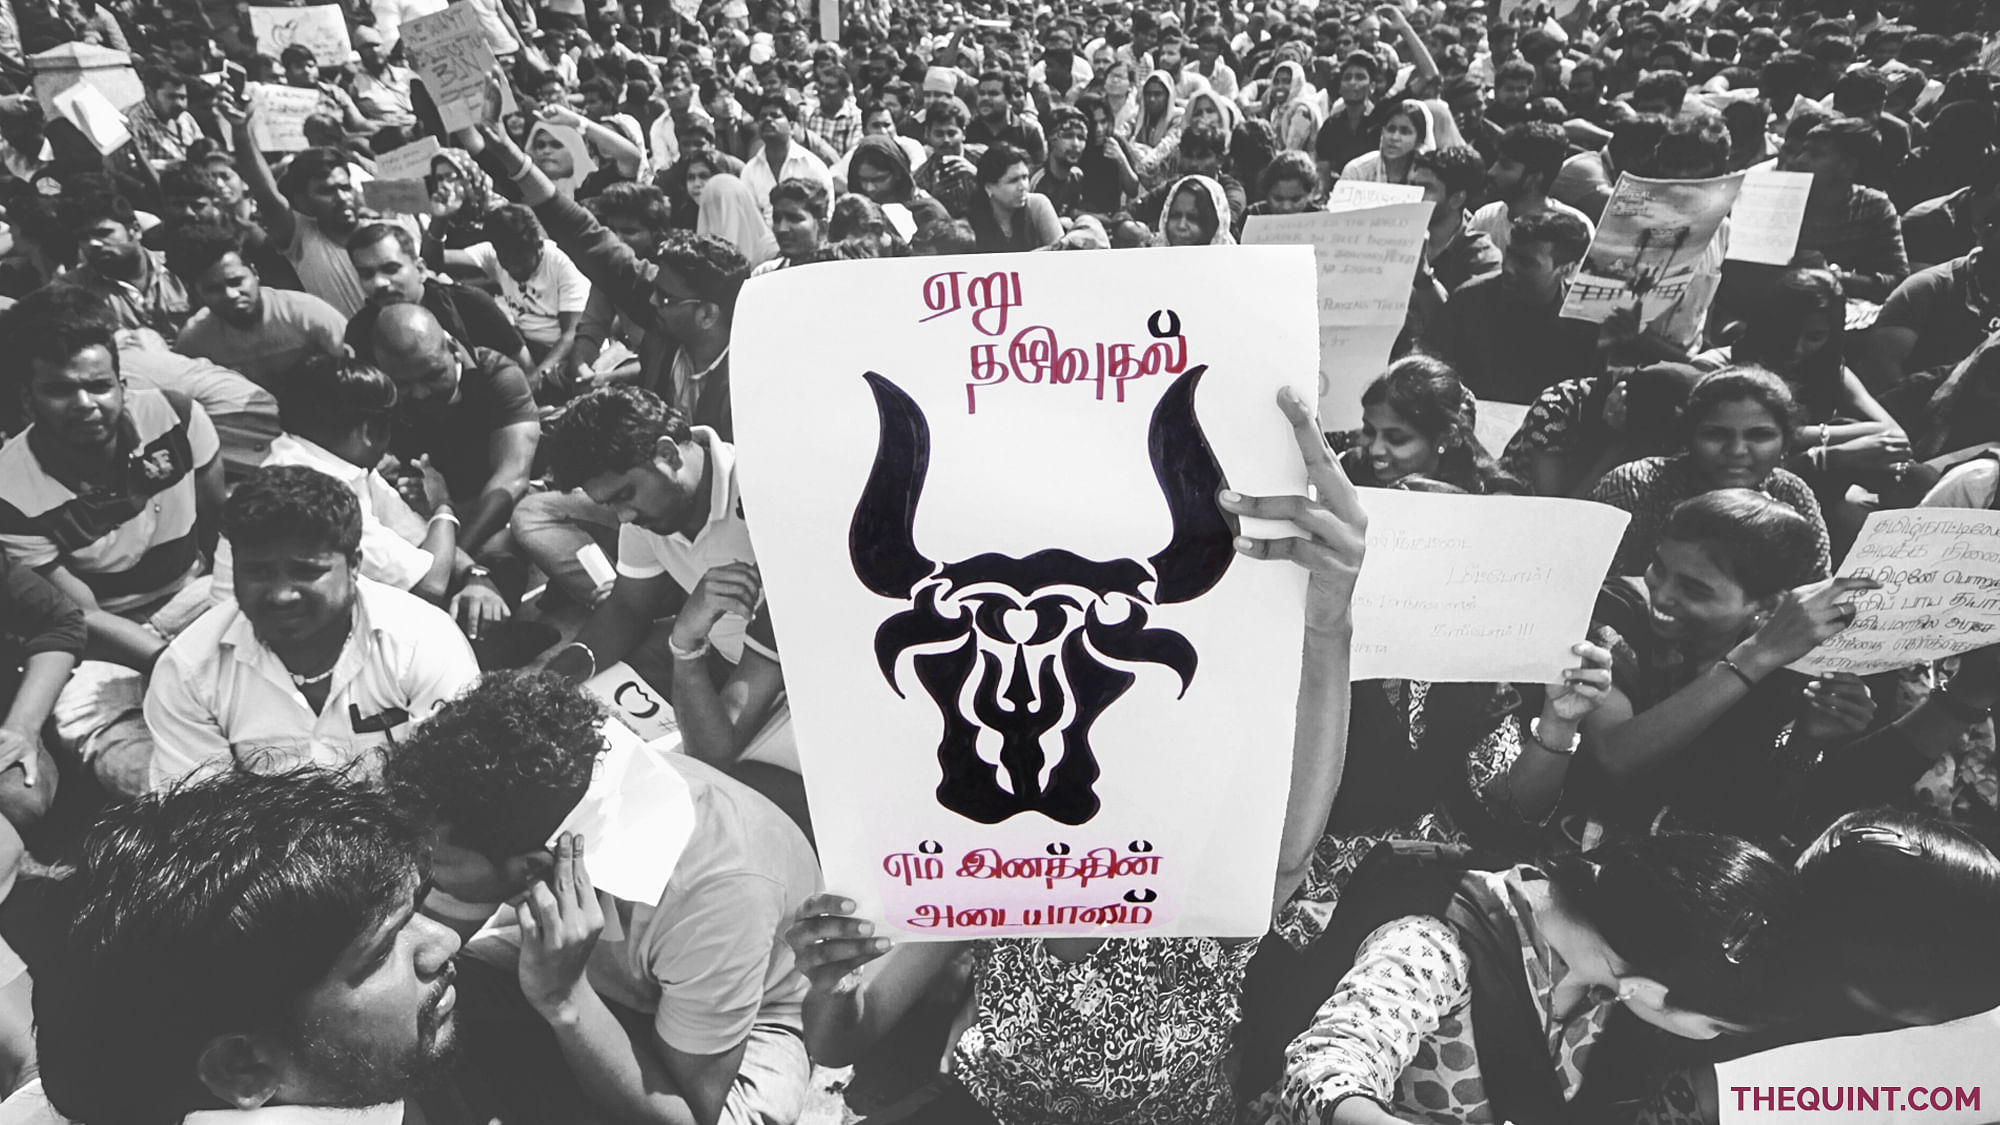 The current political transition being seen in the AIADMK and the DMK, the two parties that have ruled the state for close to five decades, is an unsettling issue for the youth. (Photo: Altered by <b>The Quint</b>)